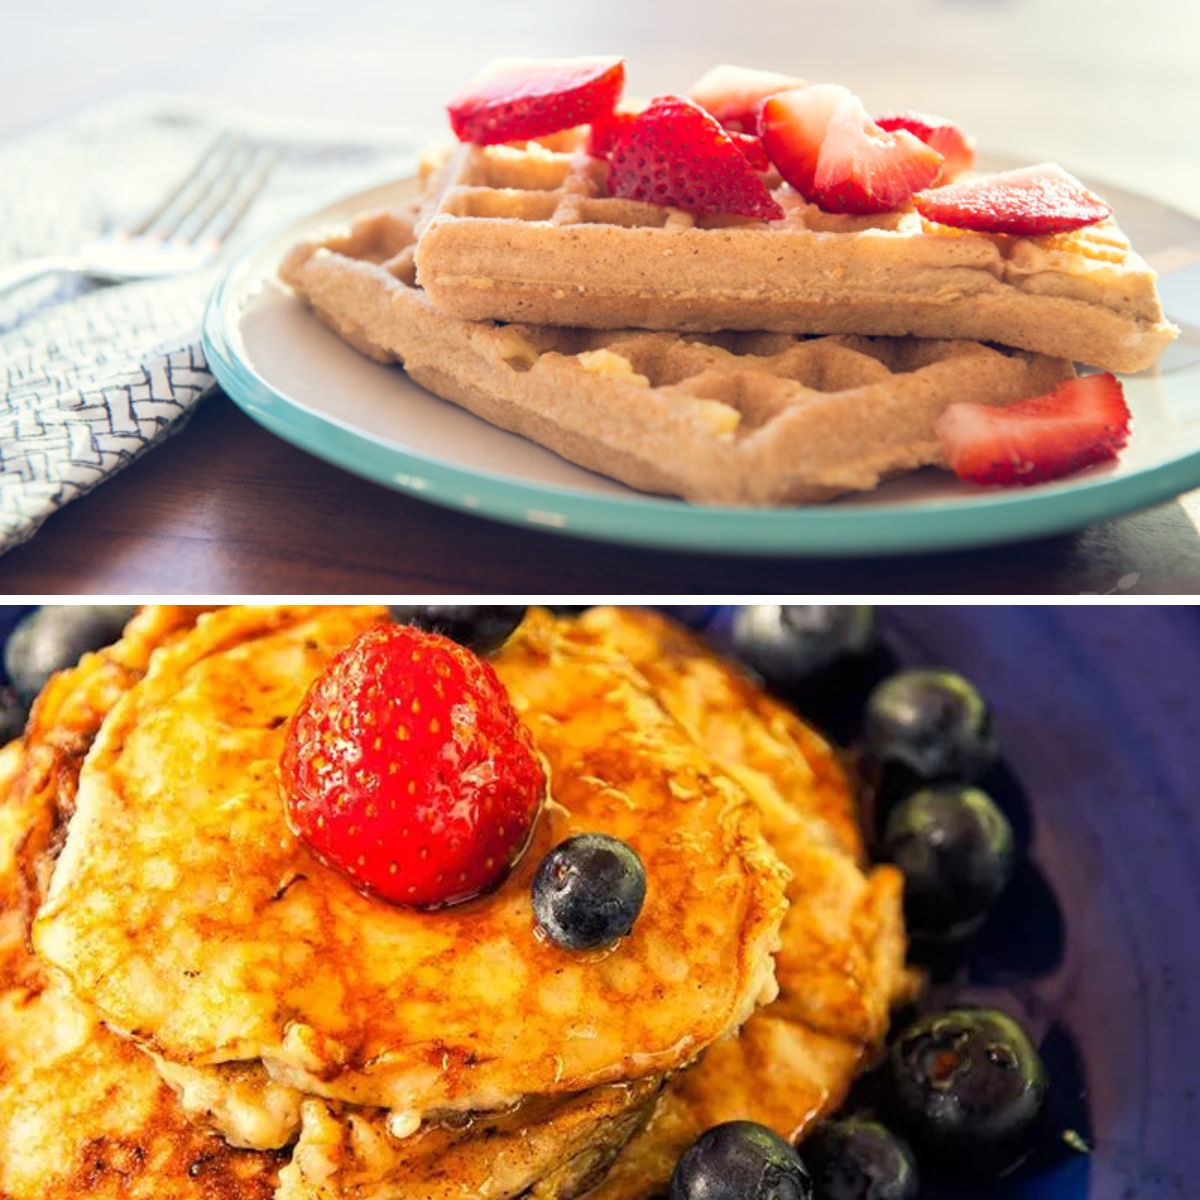 pancakes and waffles for paleo breakfast